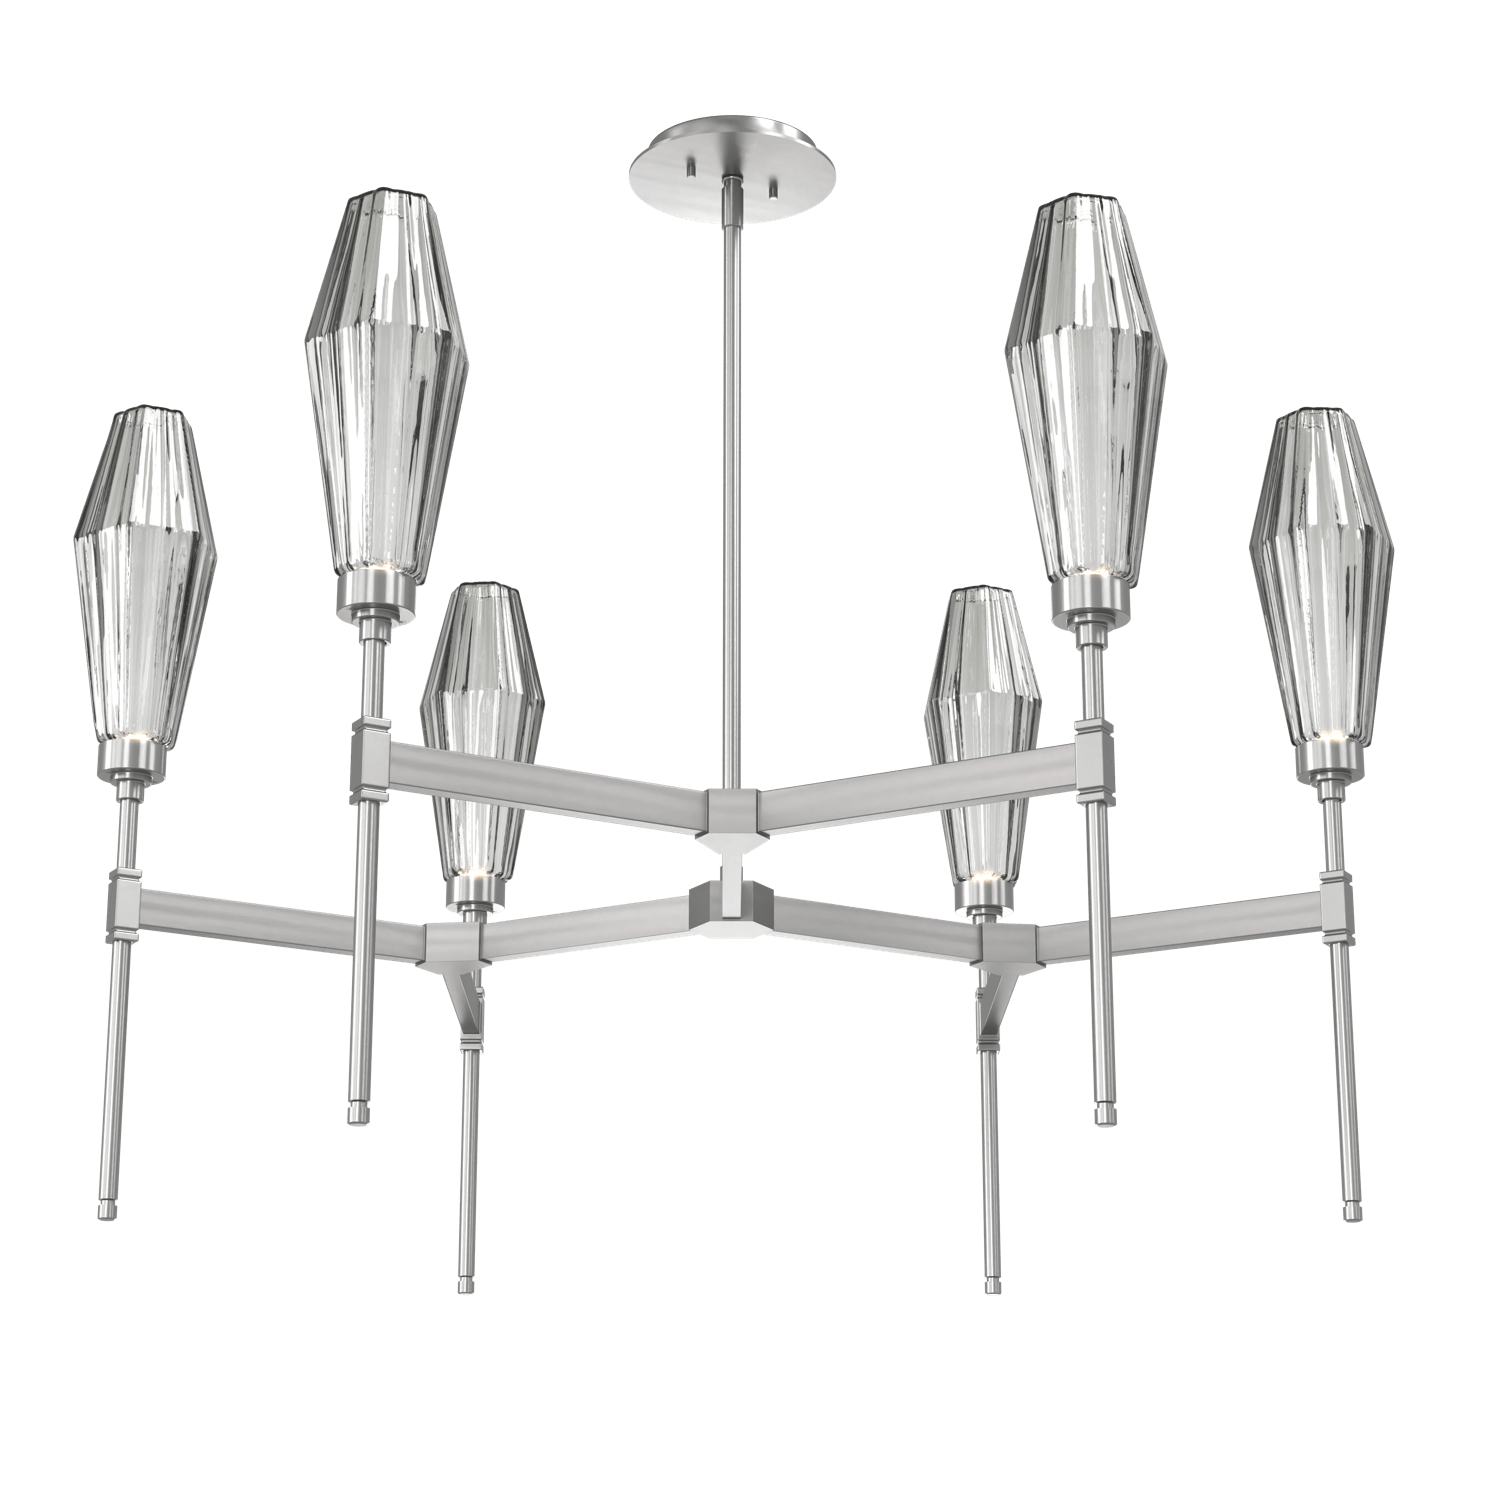 CHB0049-37-SN-RS-Hammerton-Studio-Aalto-37-inch-round-belvedere-chandelier-with-satin-nickel-finish-and-optic-ribbed-smoke-glass-shades-and-LED-lamping